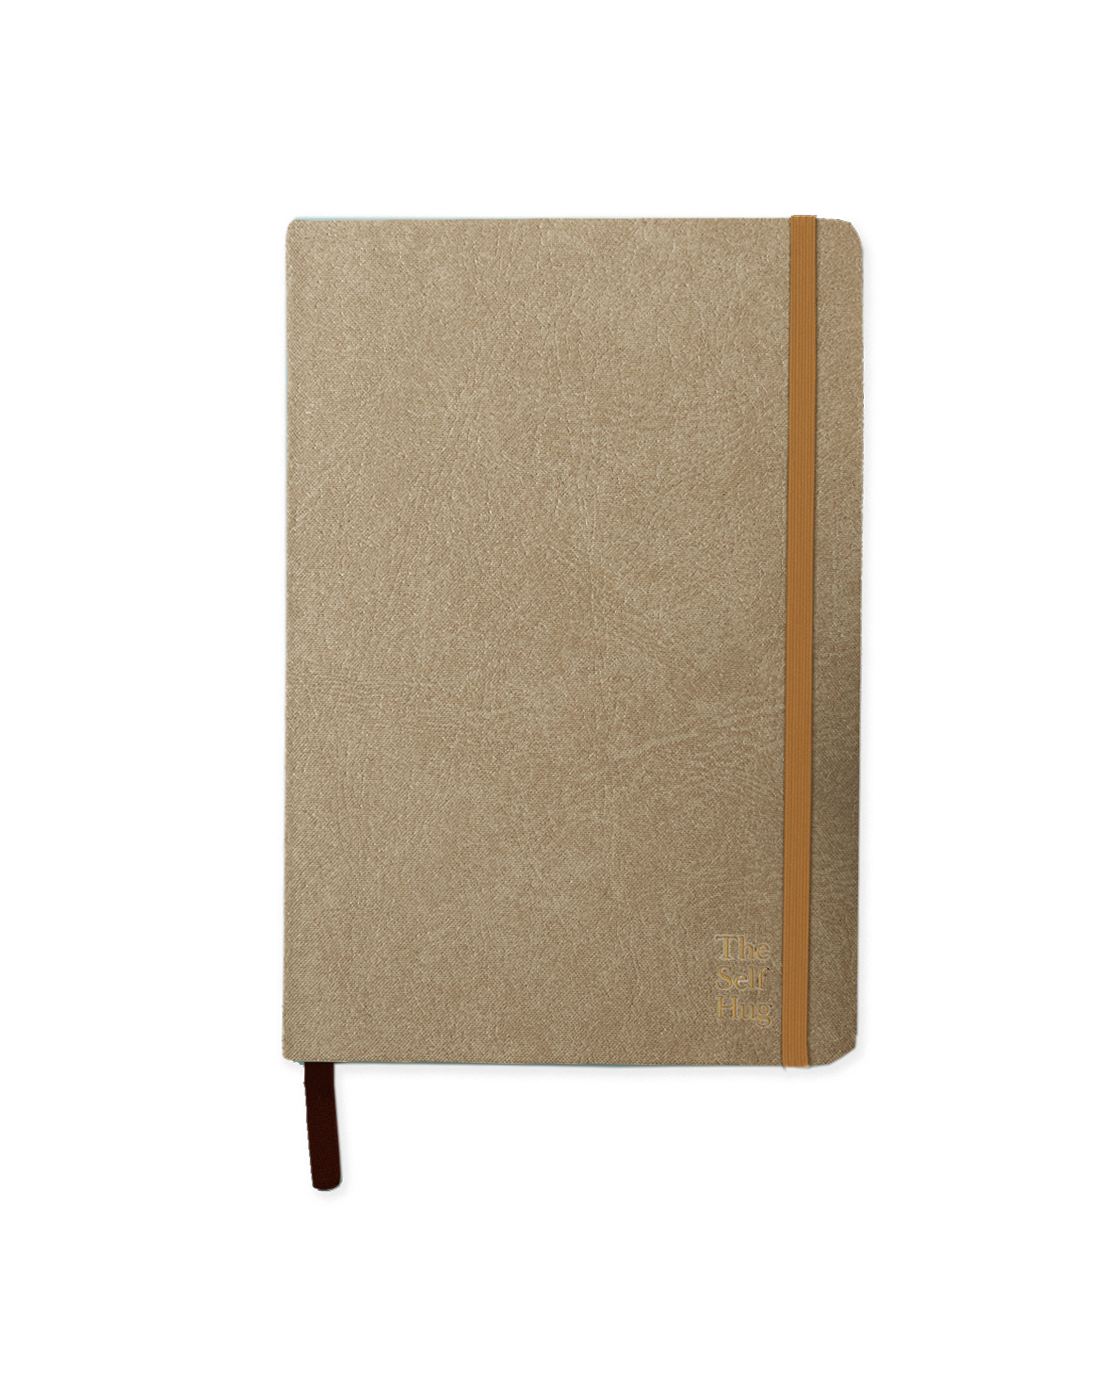 THE SELF-REFLECTION JOURNAL IN BEIGE